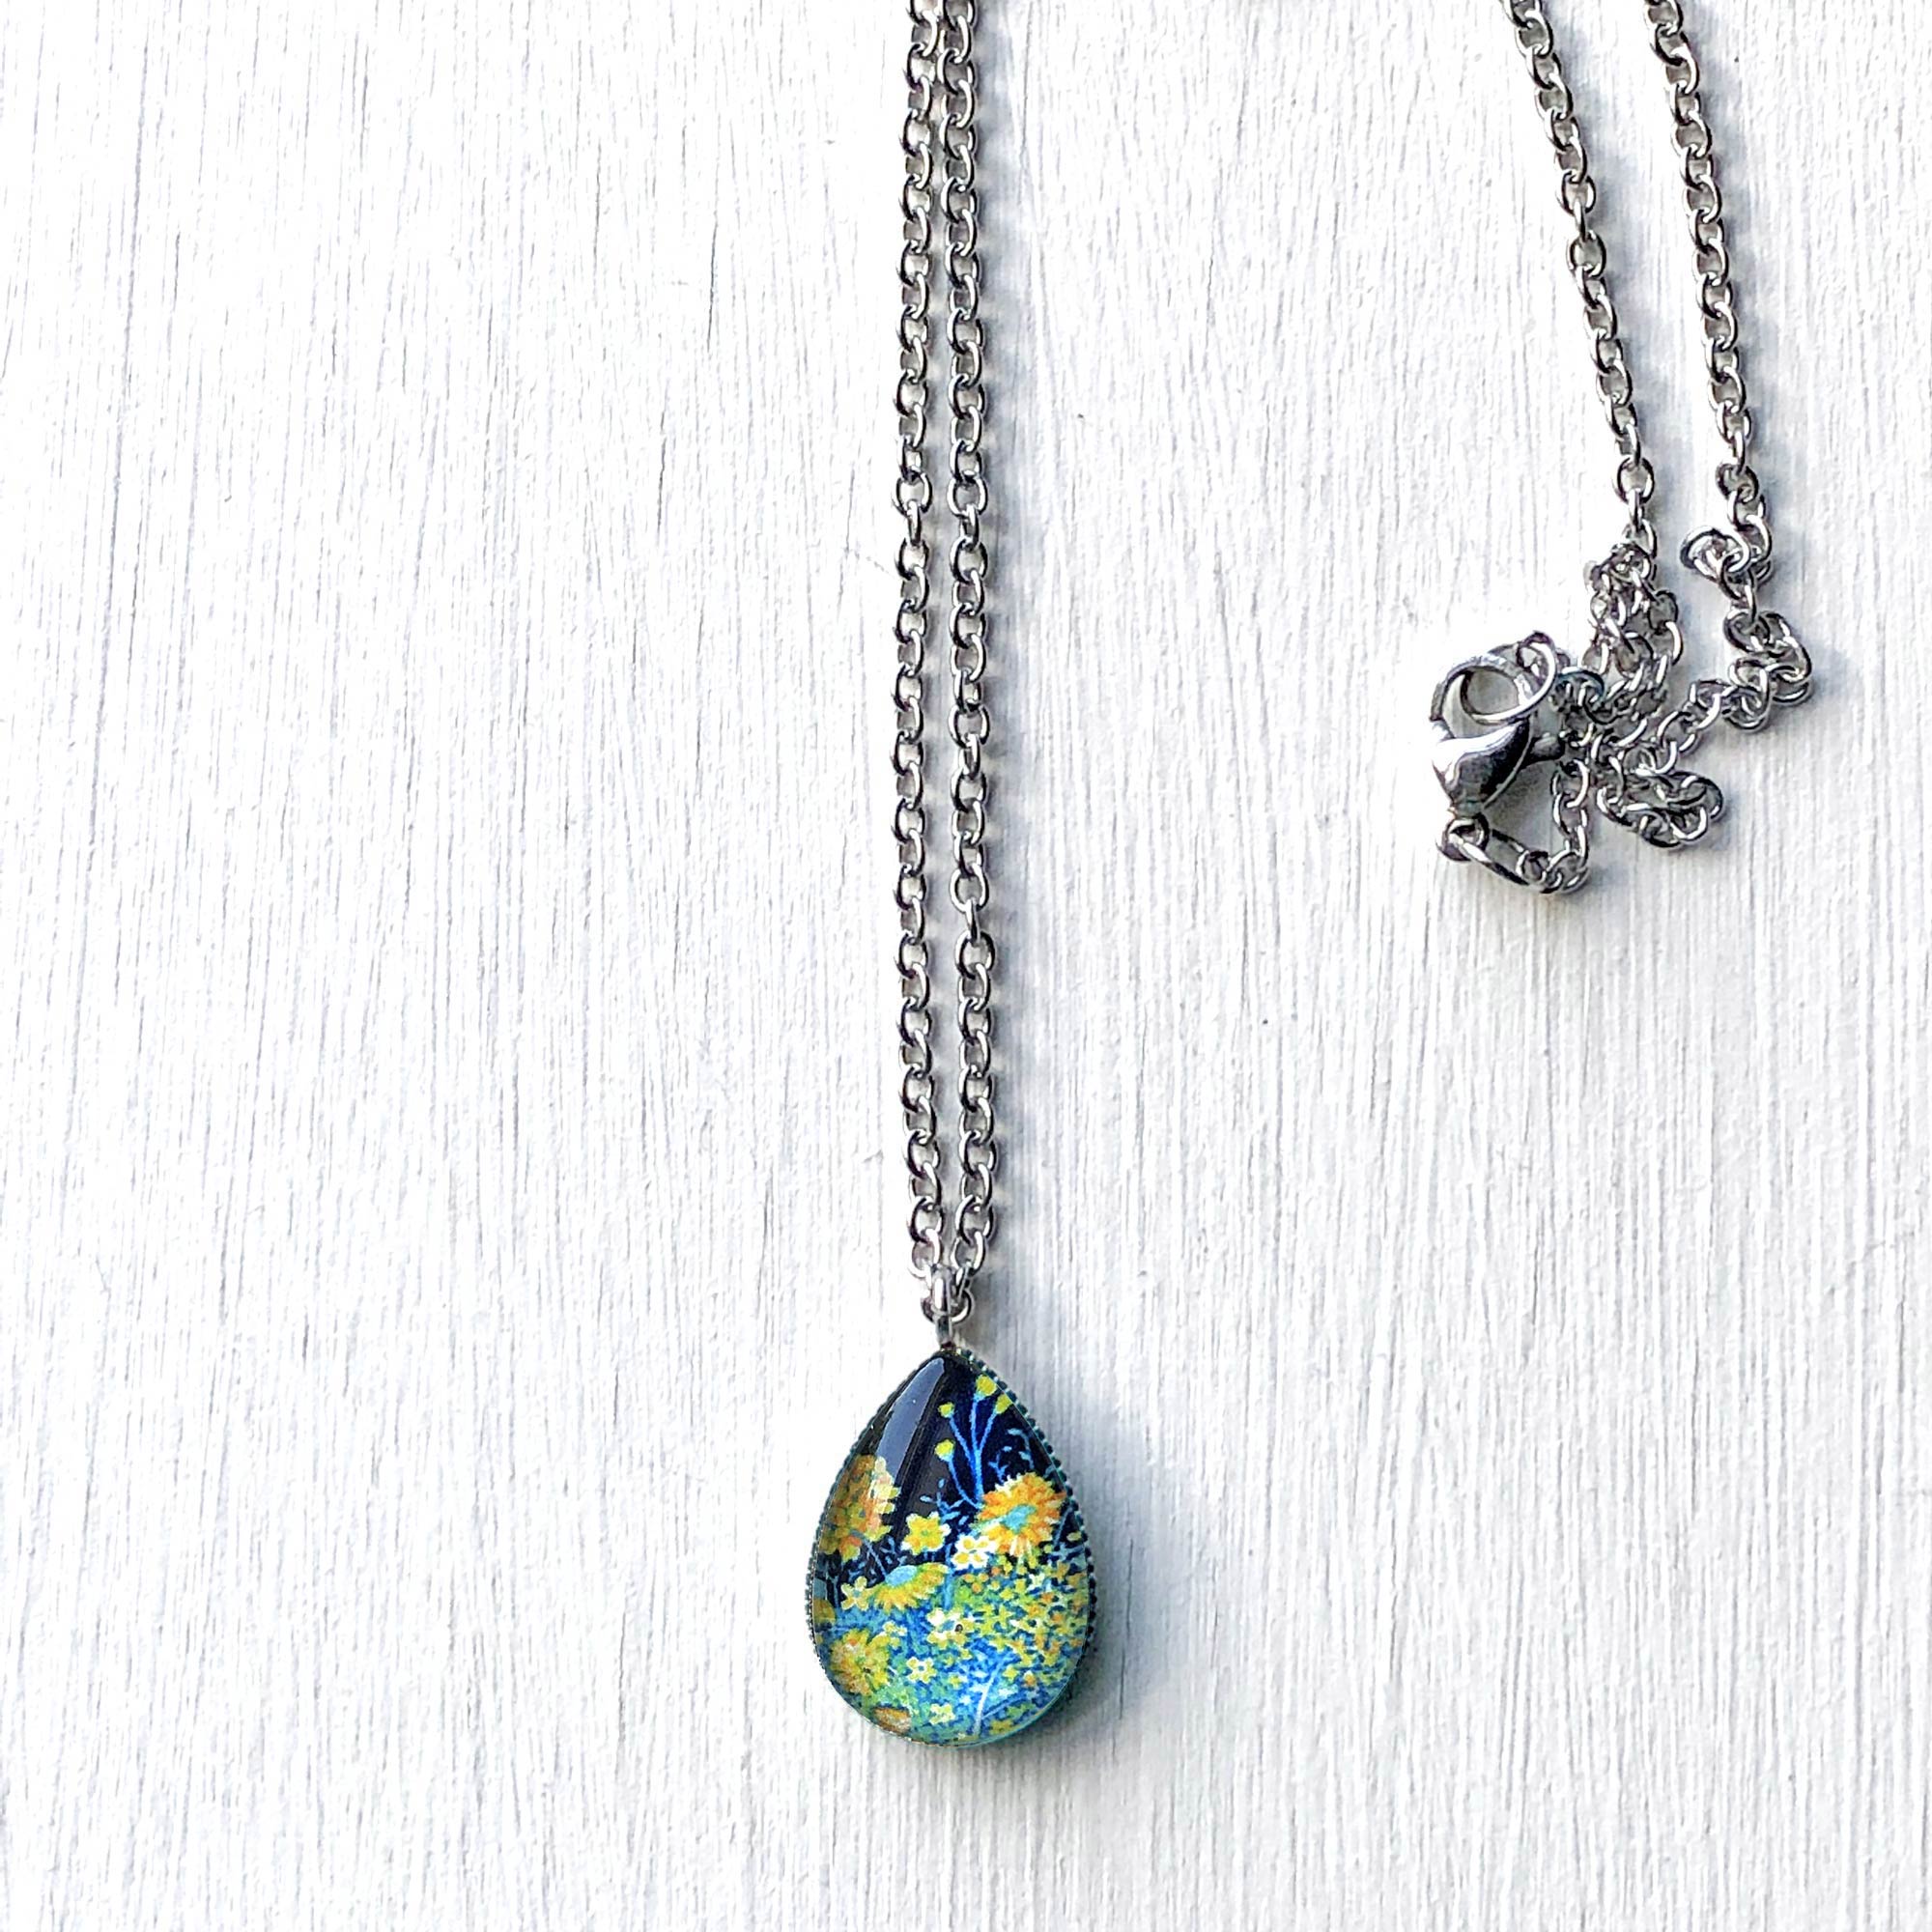 Spring Night - Stainless Steel Teardrop Necklace or Set